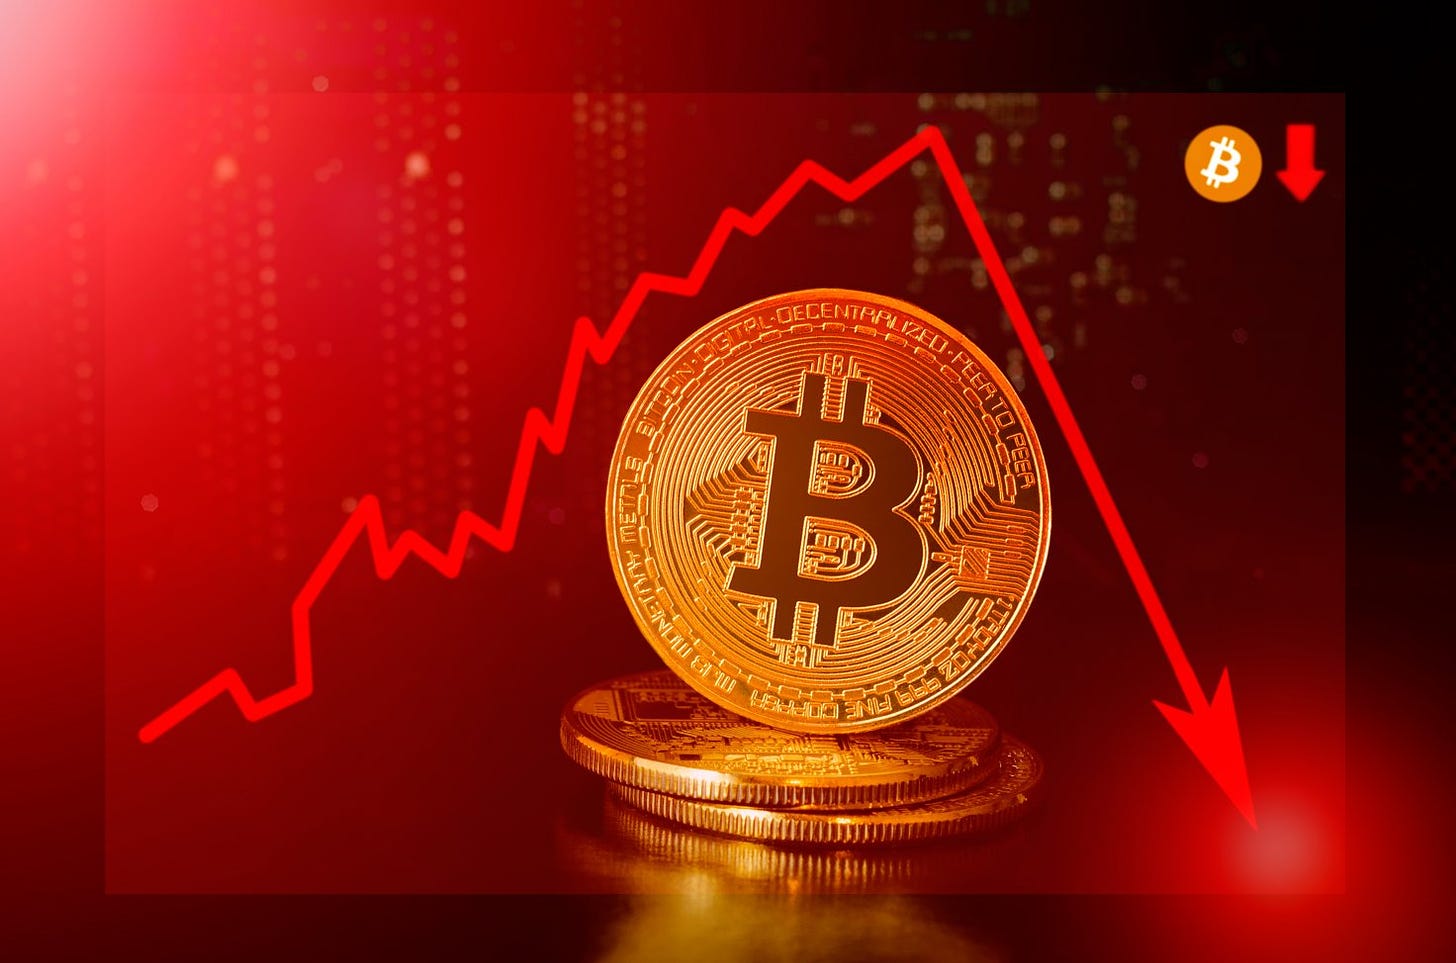 New Research] Bitcoin Crash: Is The Bull Run Over? | Currency.com